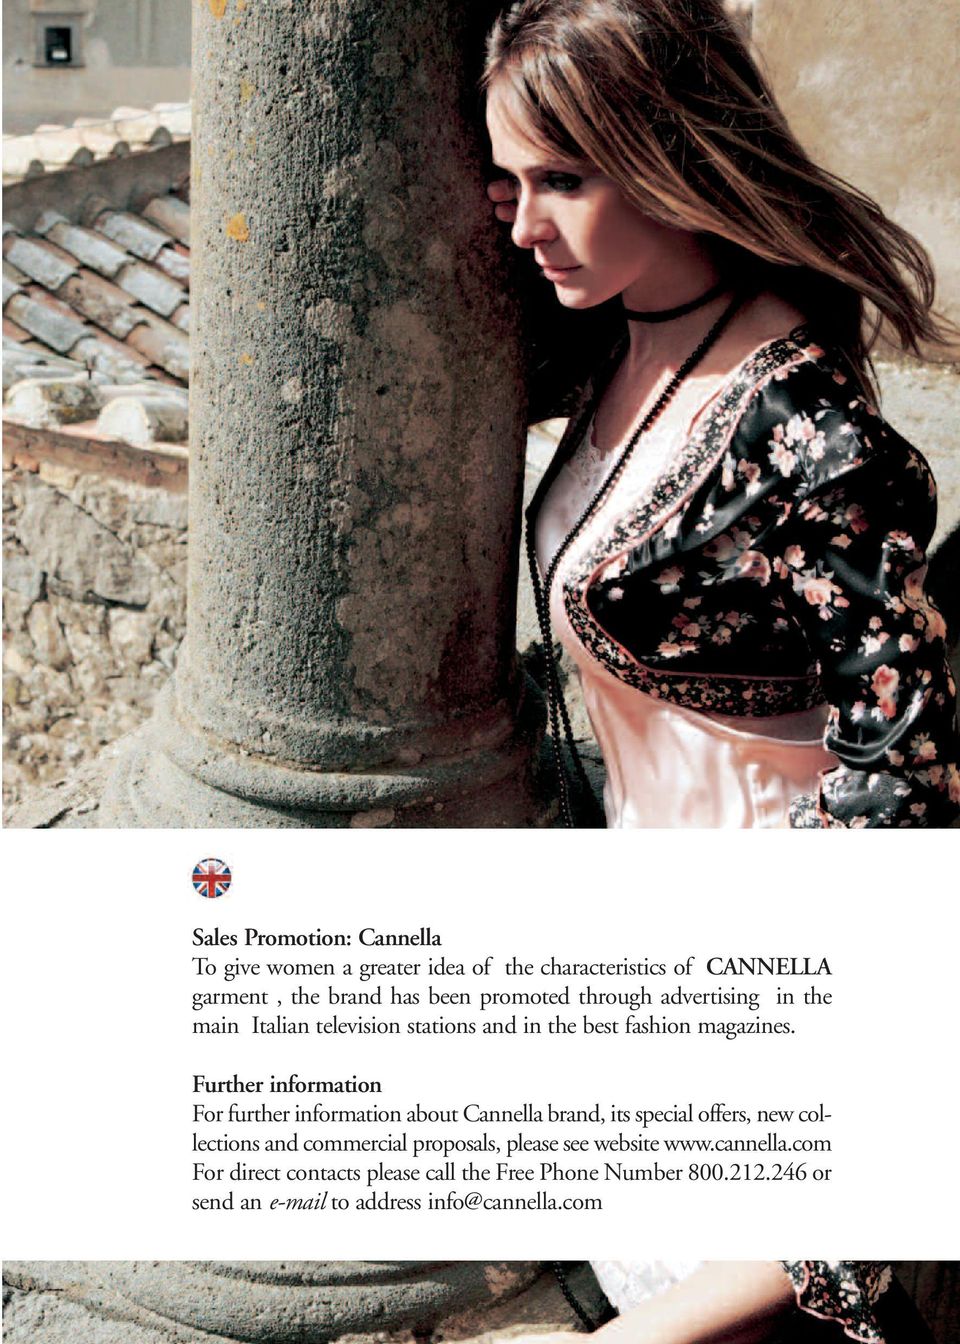 Further information For further information about Cannella brand, its special offers, new collections and commercial